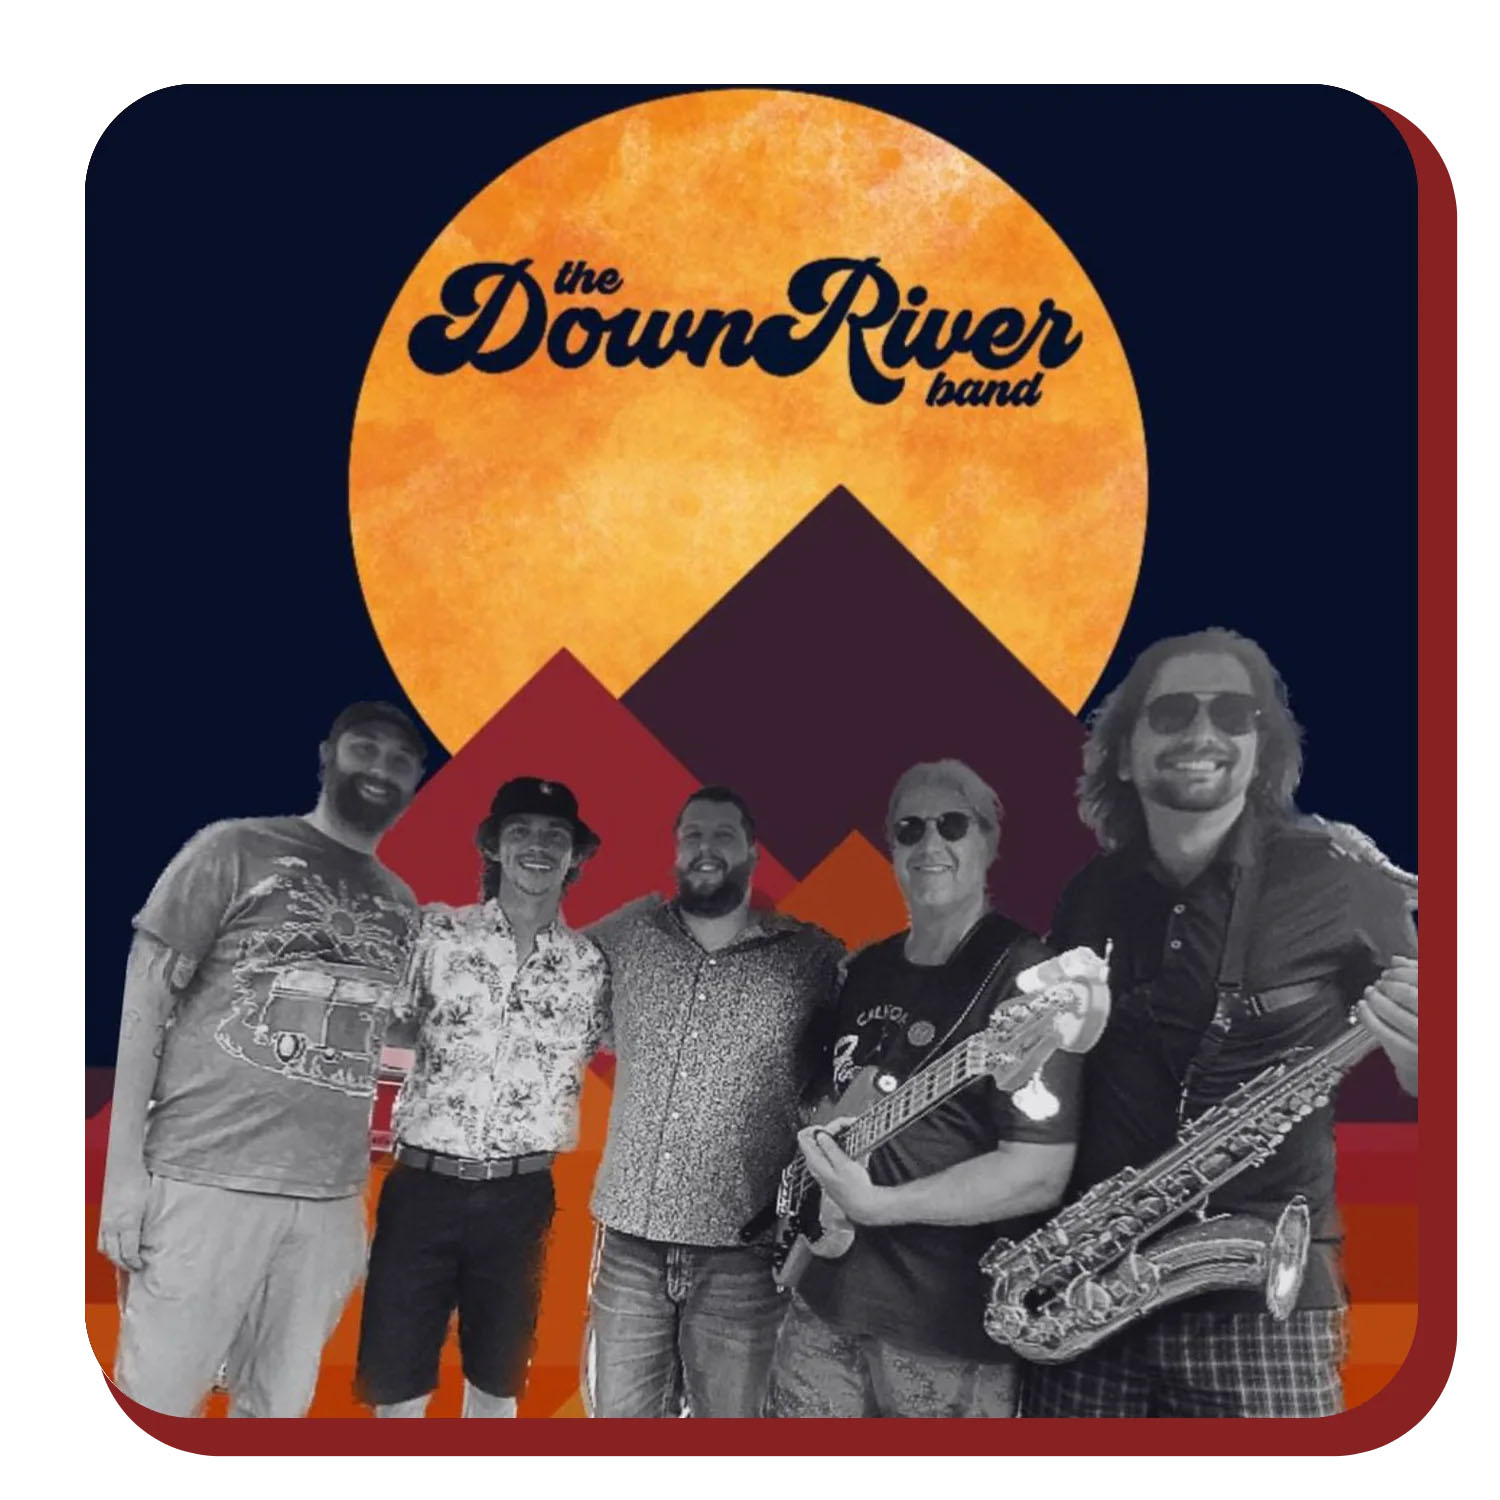 THE DOWN RIVER BAND